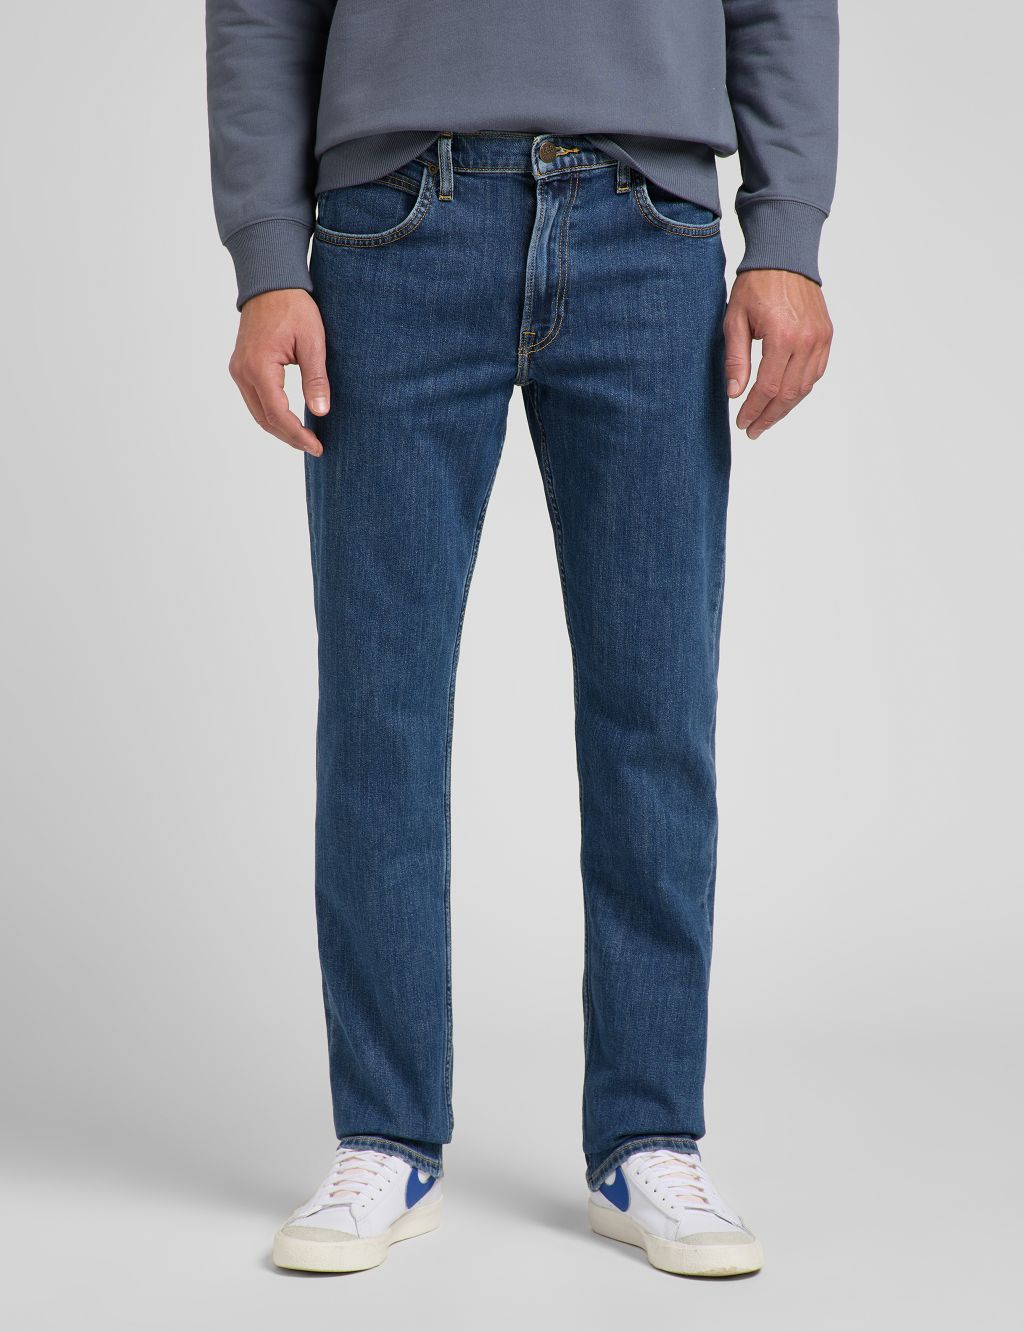 Brooklyn Straight Fit Jeans image 1